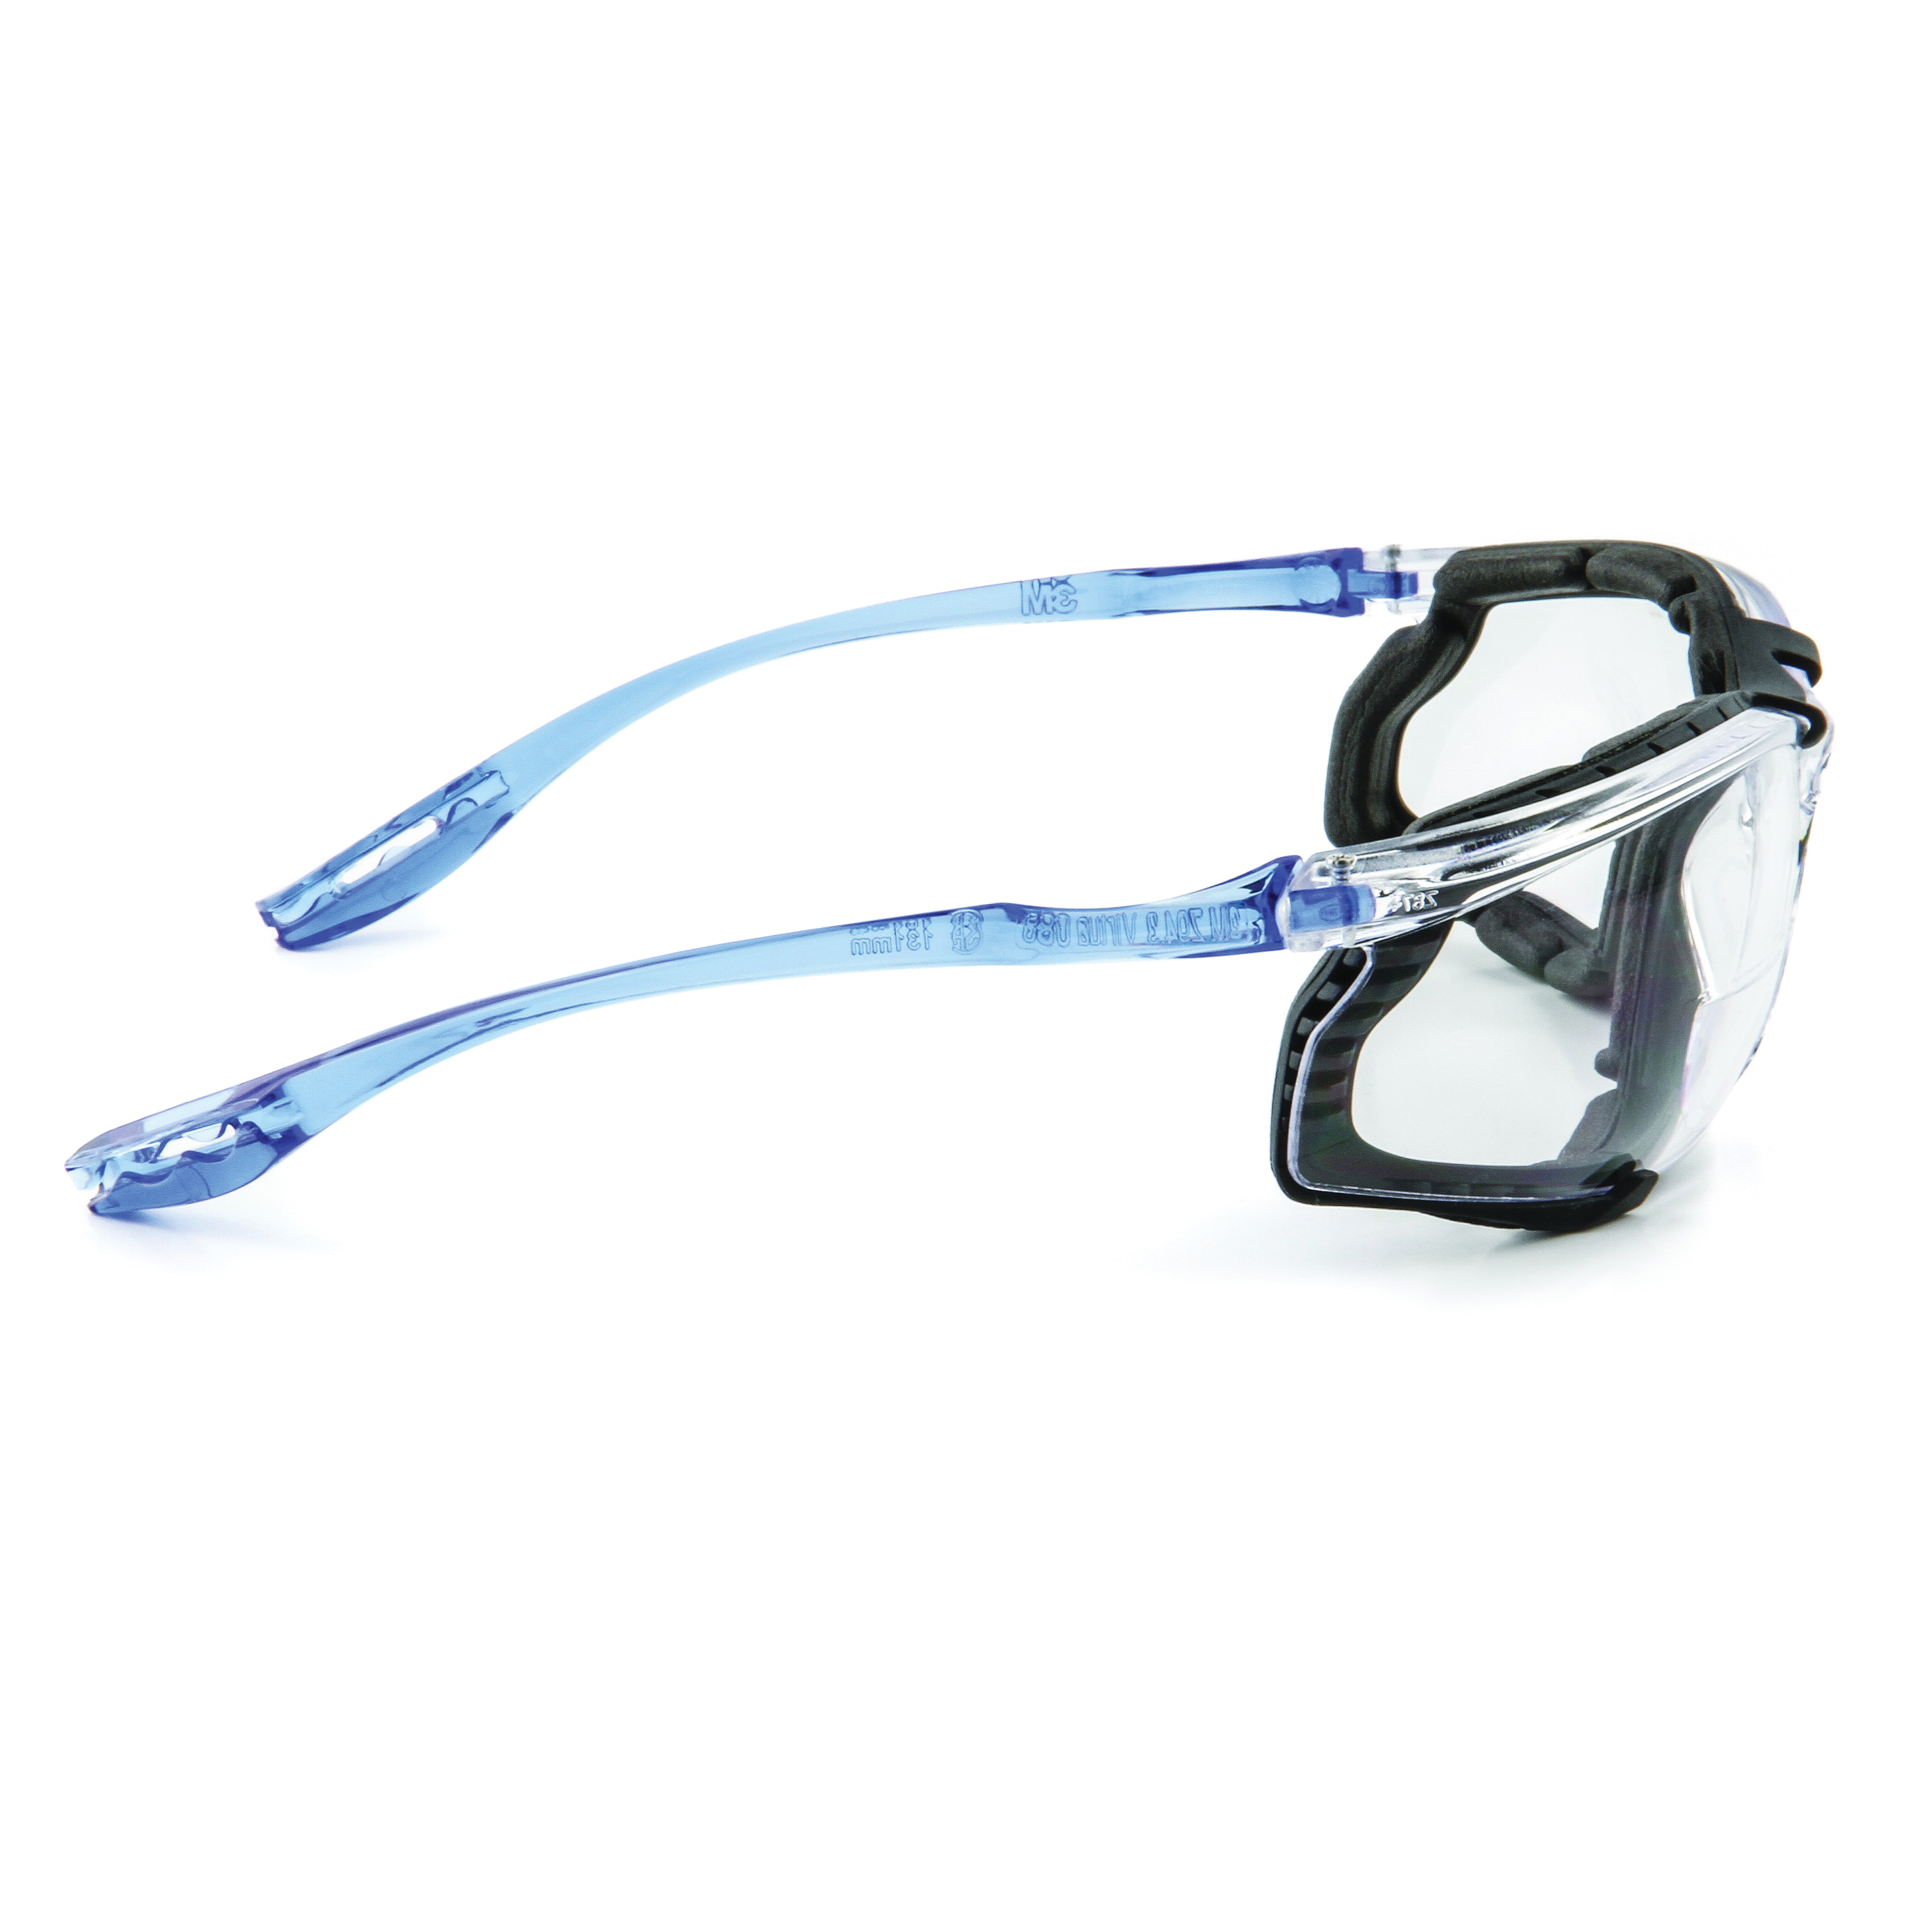 3M™ Aearo Virtua™ 078371-62121 Bi-Focal Lens Economy Lightweight Reader Protective Eyewear, 2.5 Diopter, Clear Lens, Clear, Plastic Frame, Polycarbonate Lens, 99.9 % UV Protection, ANSI Z87.1-2015